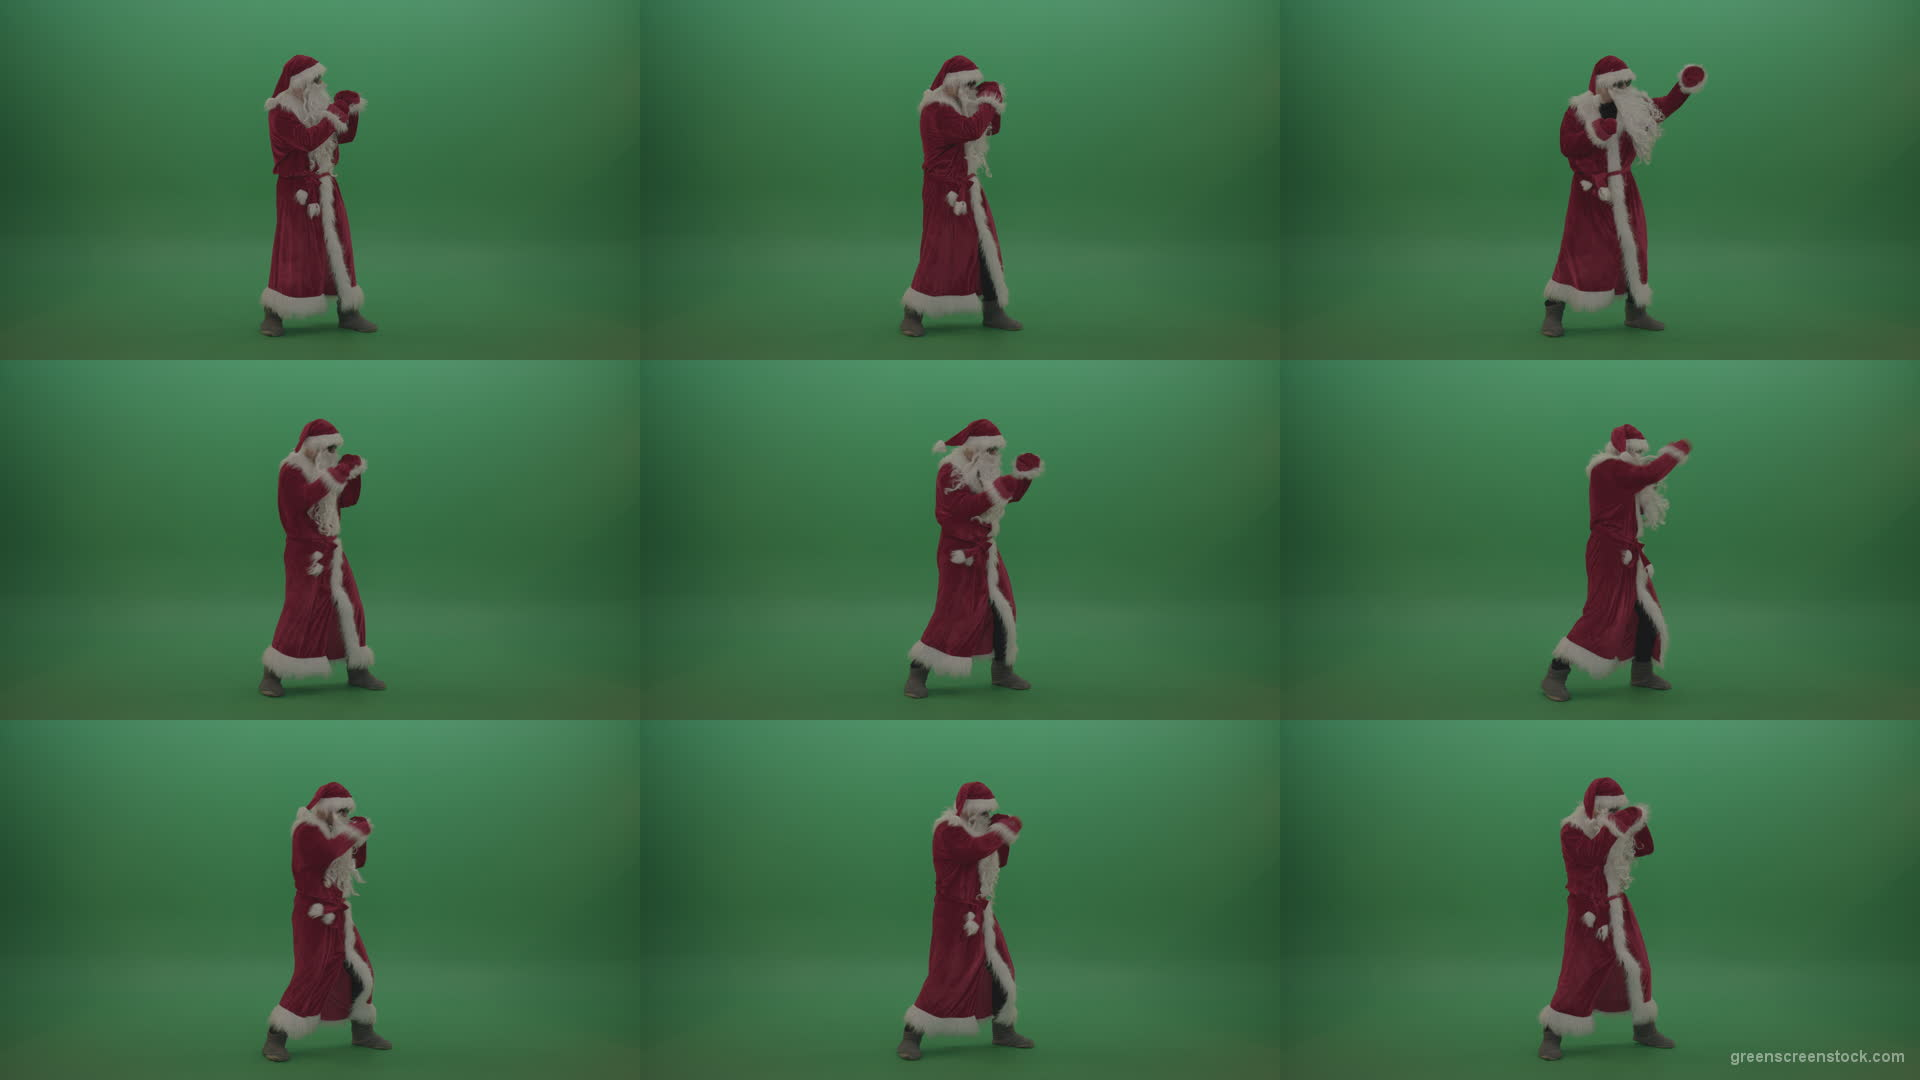 Santa-in-black-glasses-show-cases-his-boxing-skills-over-chromakey-background Green Screen Stock